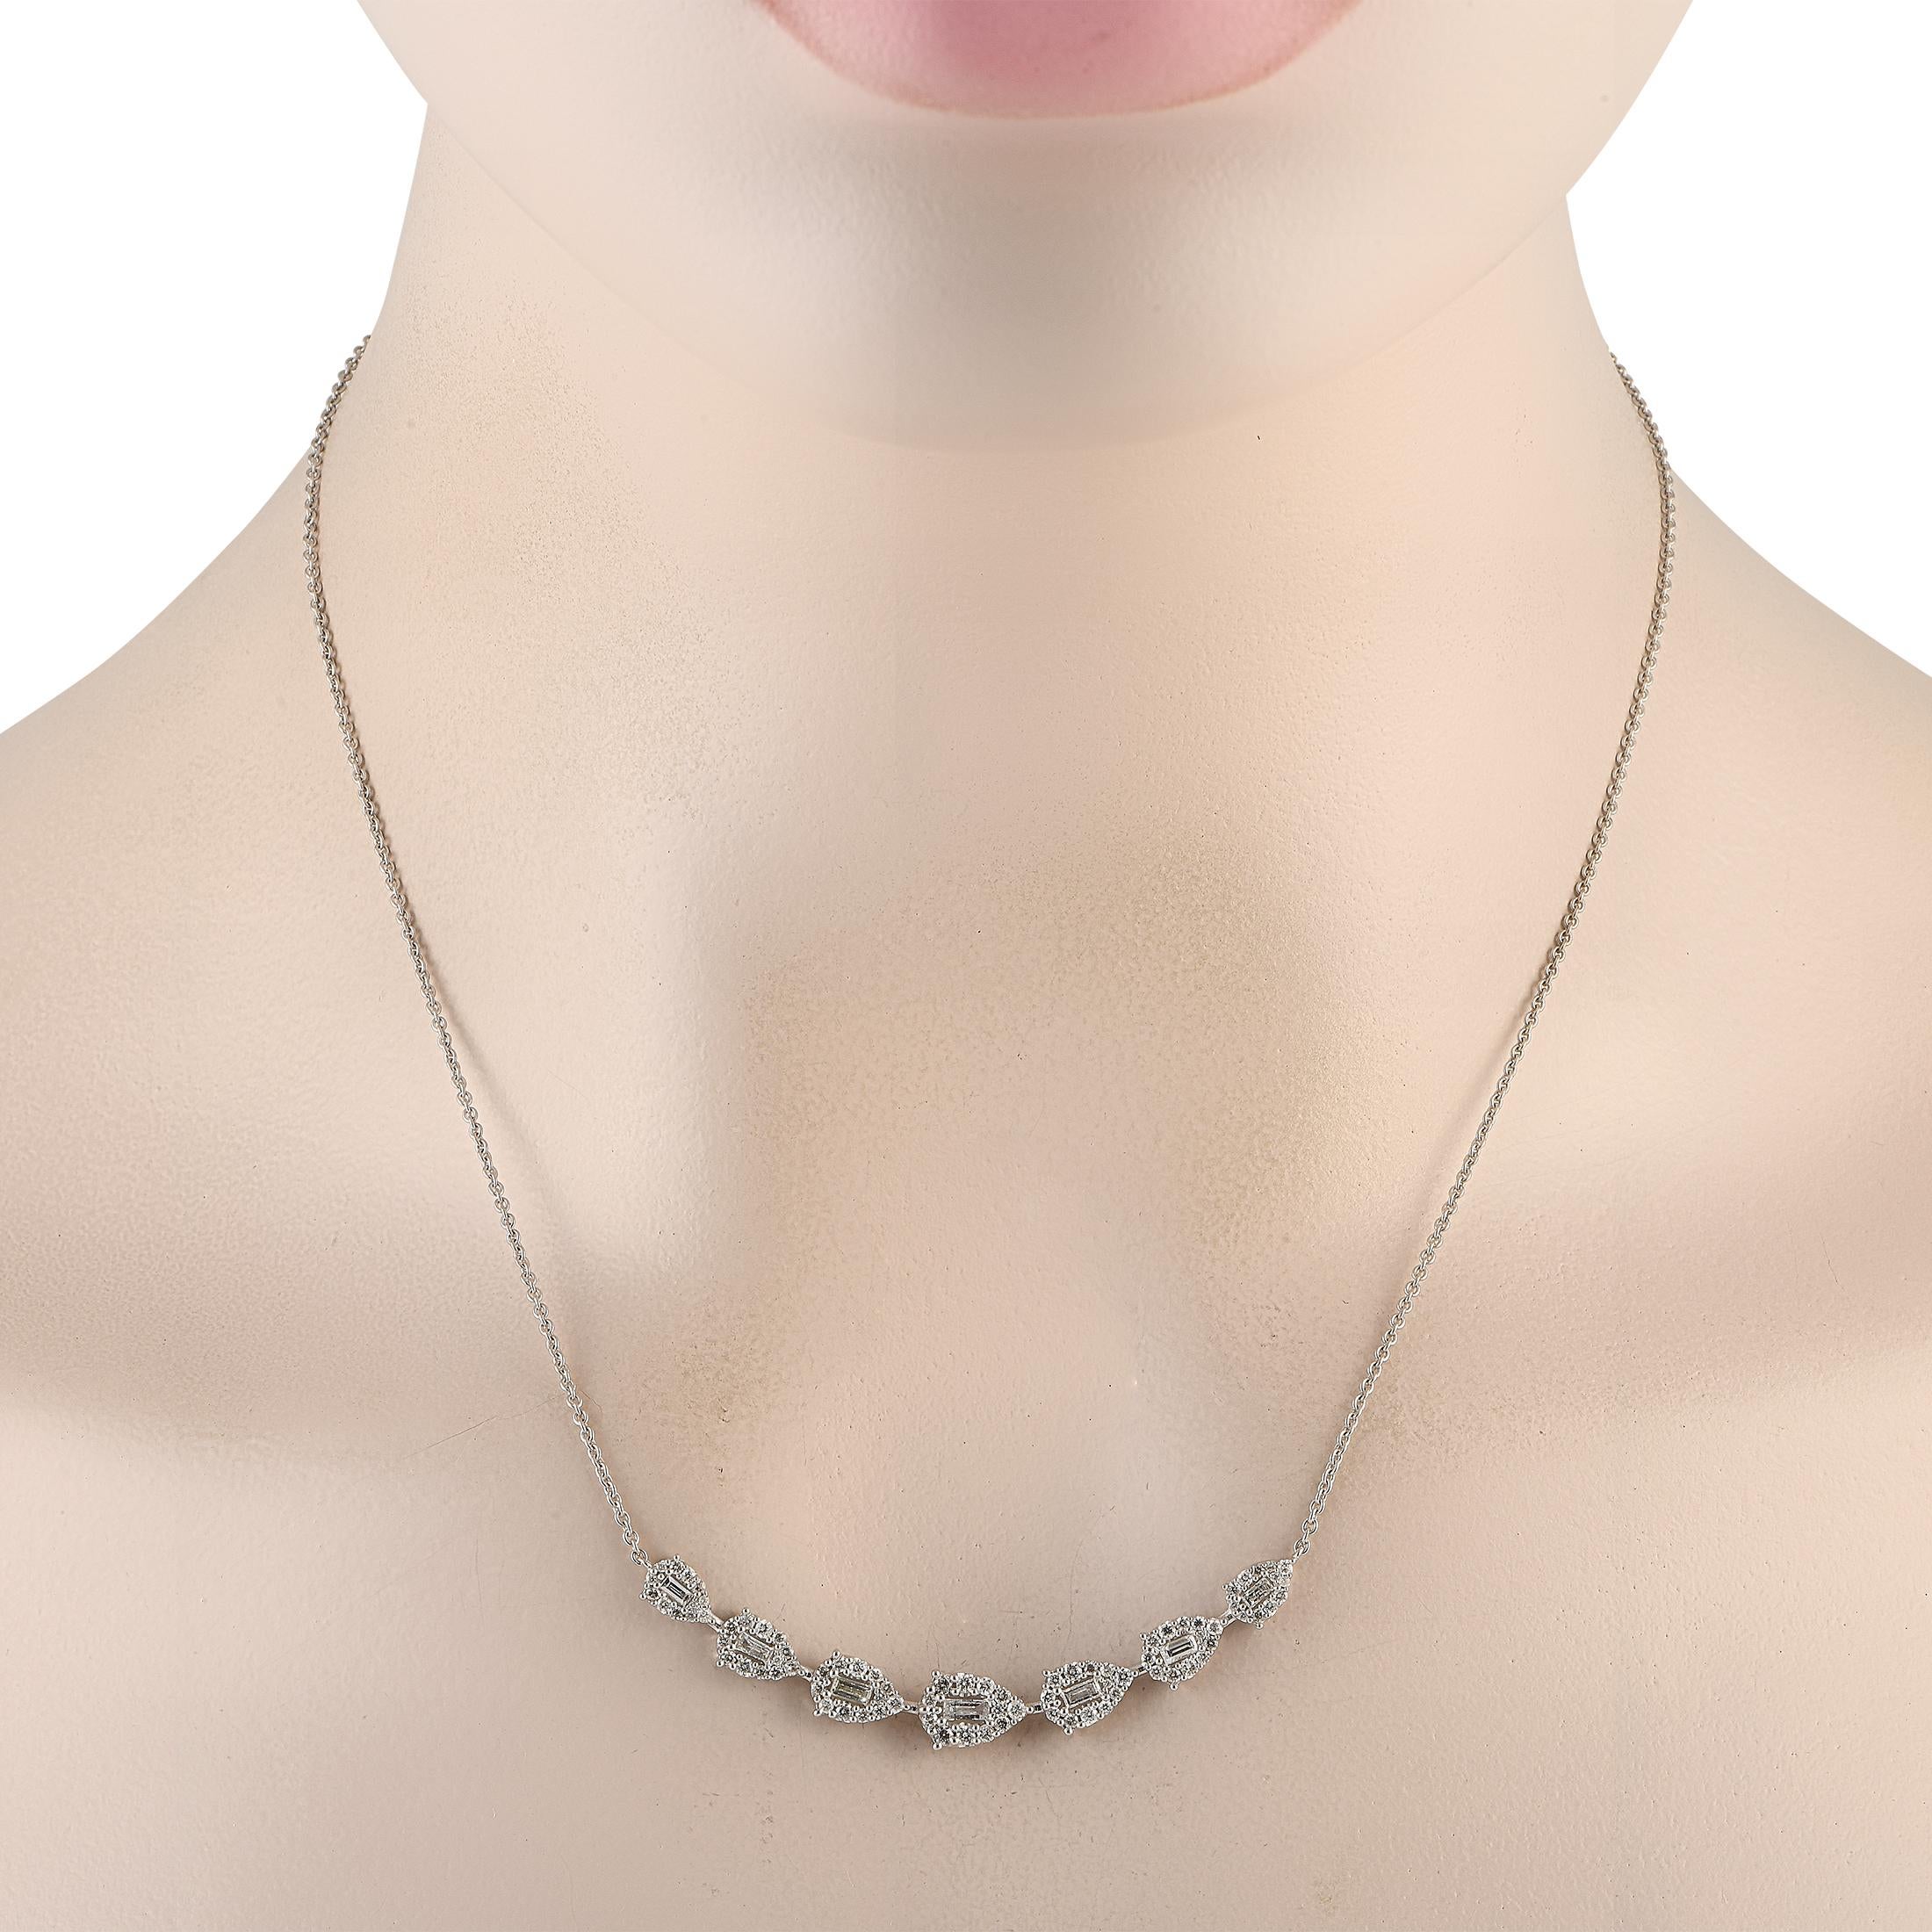 Start a trend with this charming diamond necklace. An LB Exclusive, it features a 14K white gold chain measuring 16 inches long. The necklace holds a series of tapering pear-shaped motifs in an east-west setting, with edges traced by round diamonds